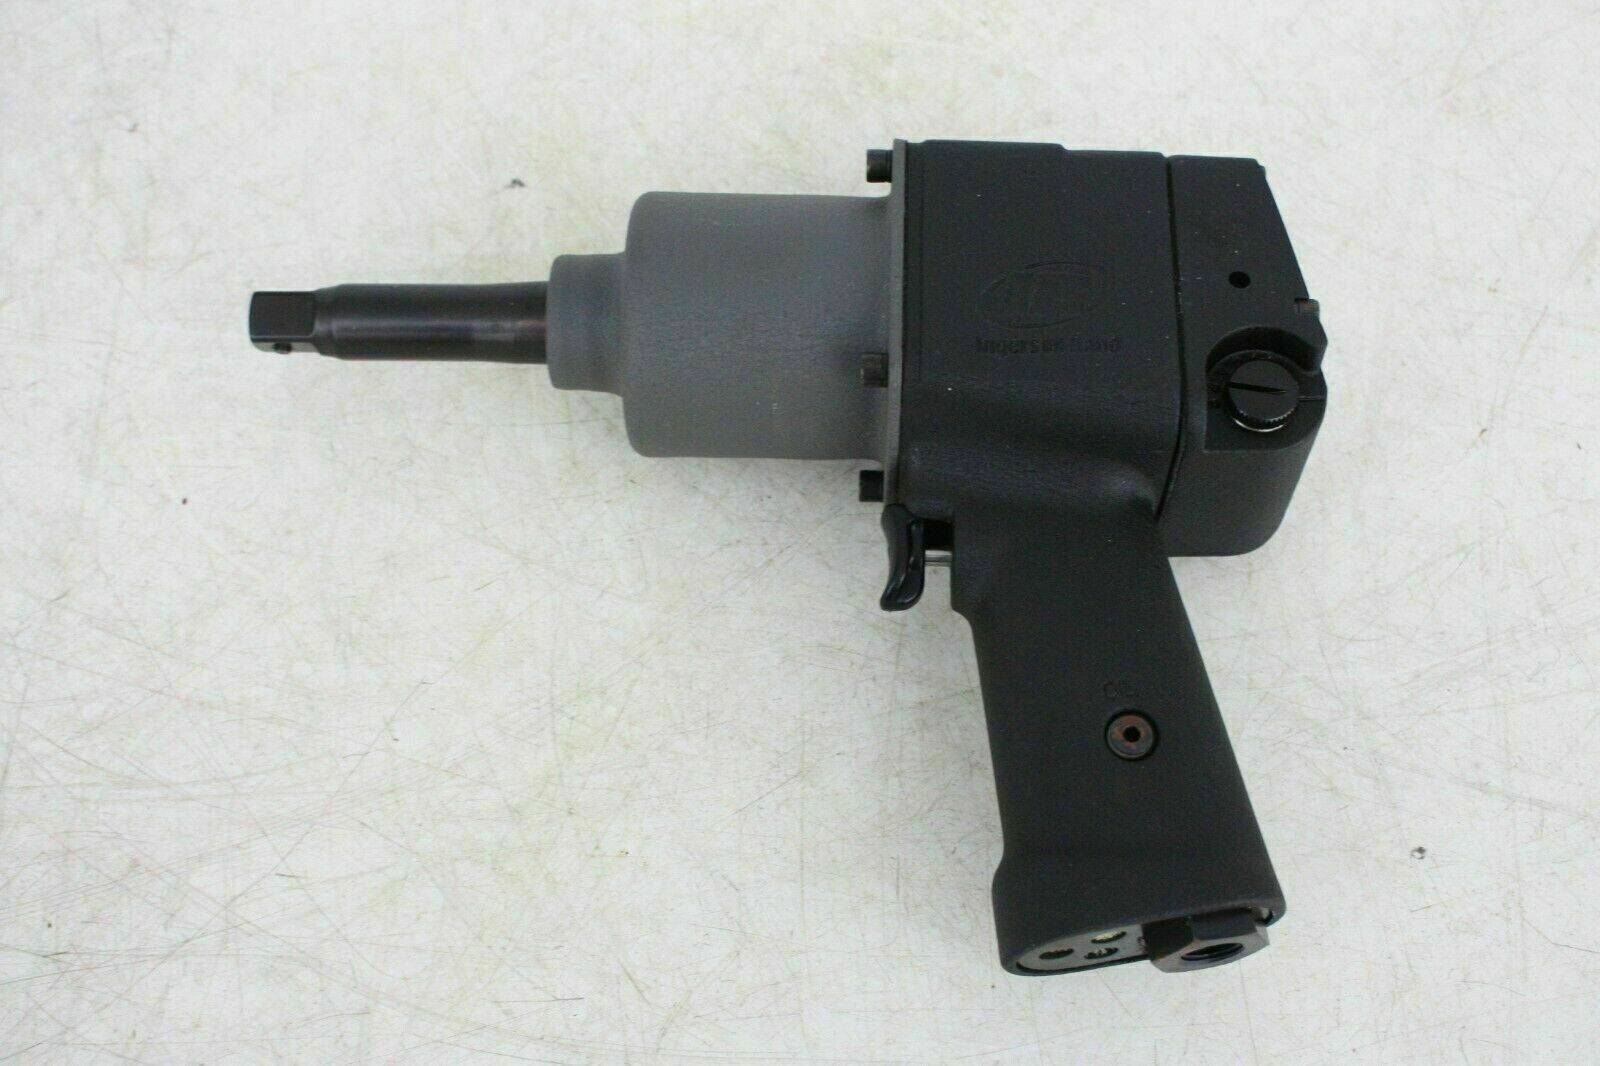 Ingersoll Rand air impact wrench 2906p impactool 175431113092